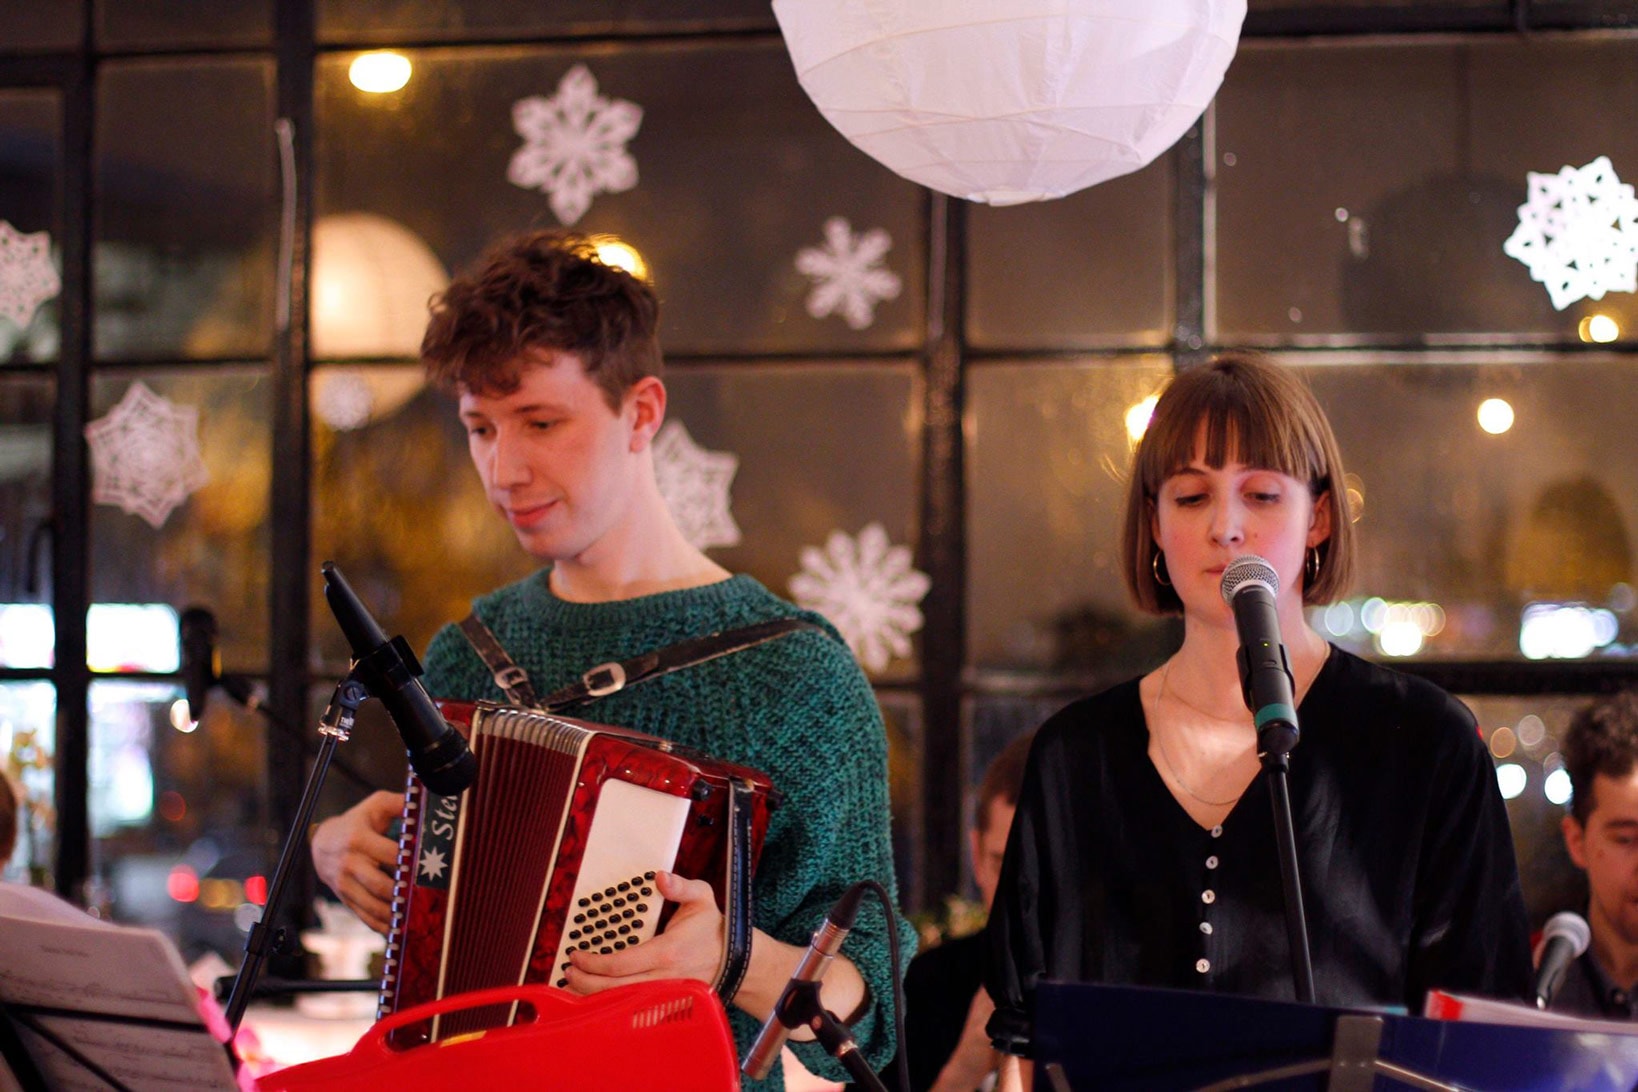 Two musicians standing behind microphones. One is wearing an accordian. Behind them cut out snowflakes are attached to a window.